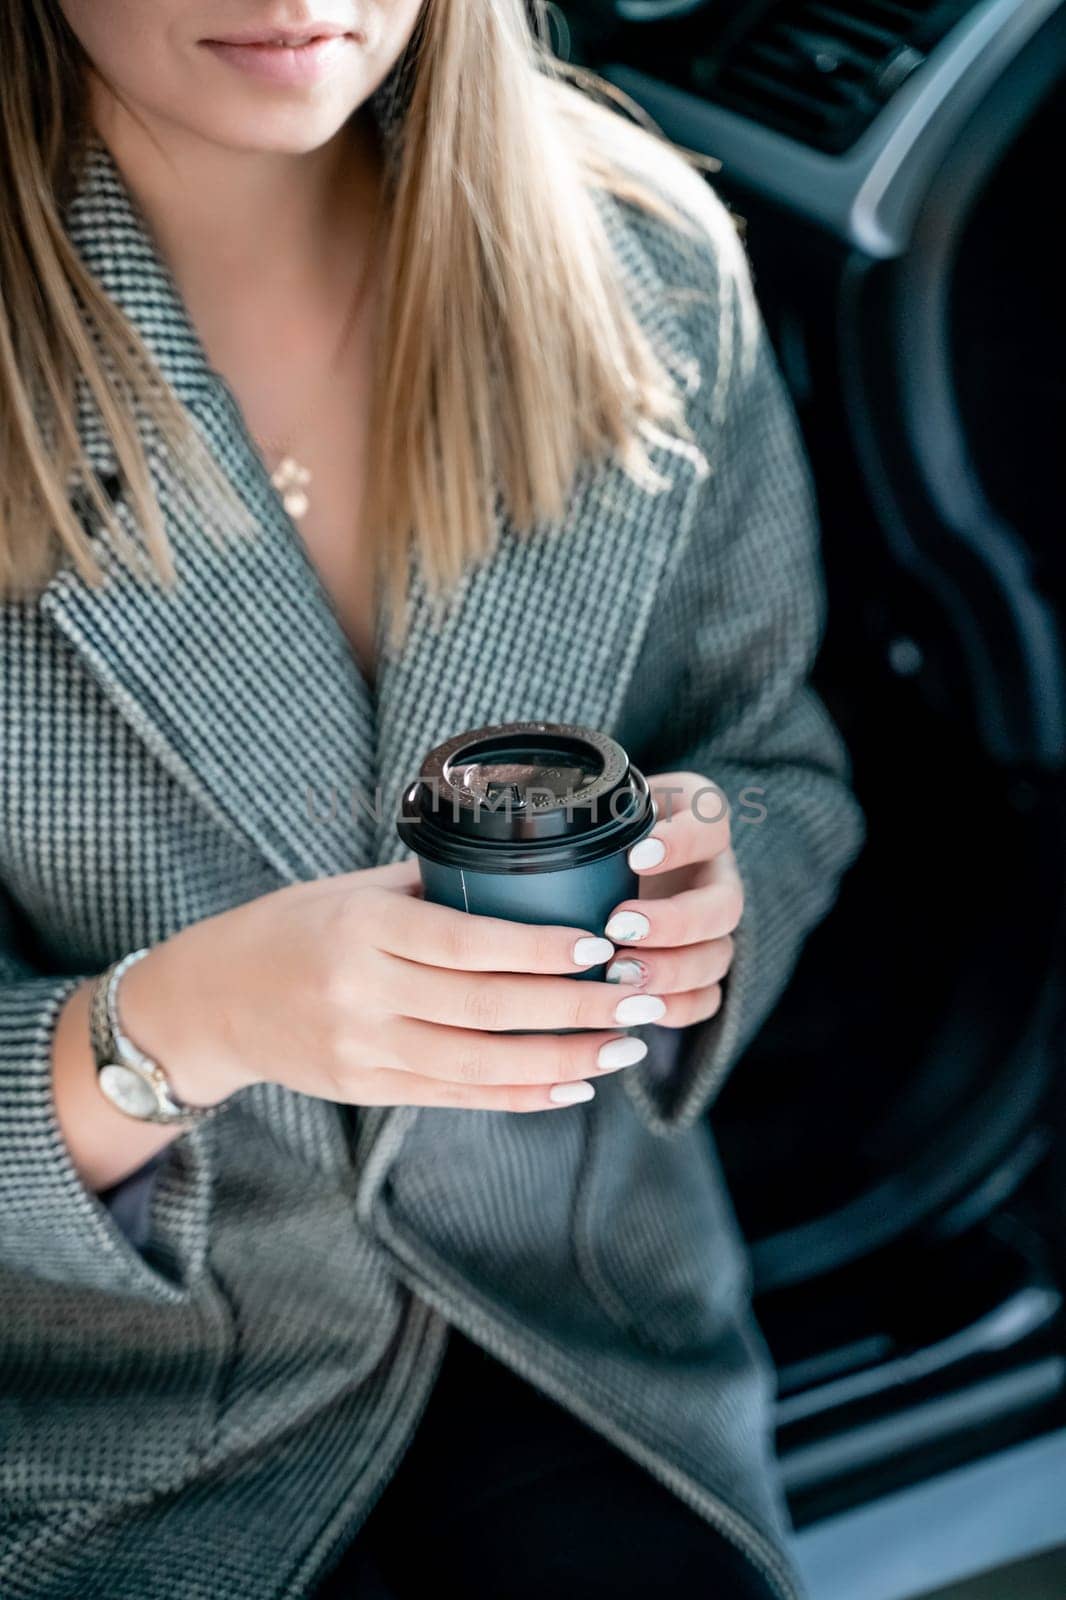 Happy woman coffee. she stands next to the car in the underground parking. Dressed in a gray coat, holding a glass of coffee in her hands, a black car. by Matiunina